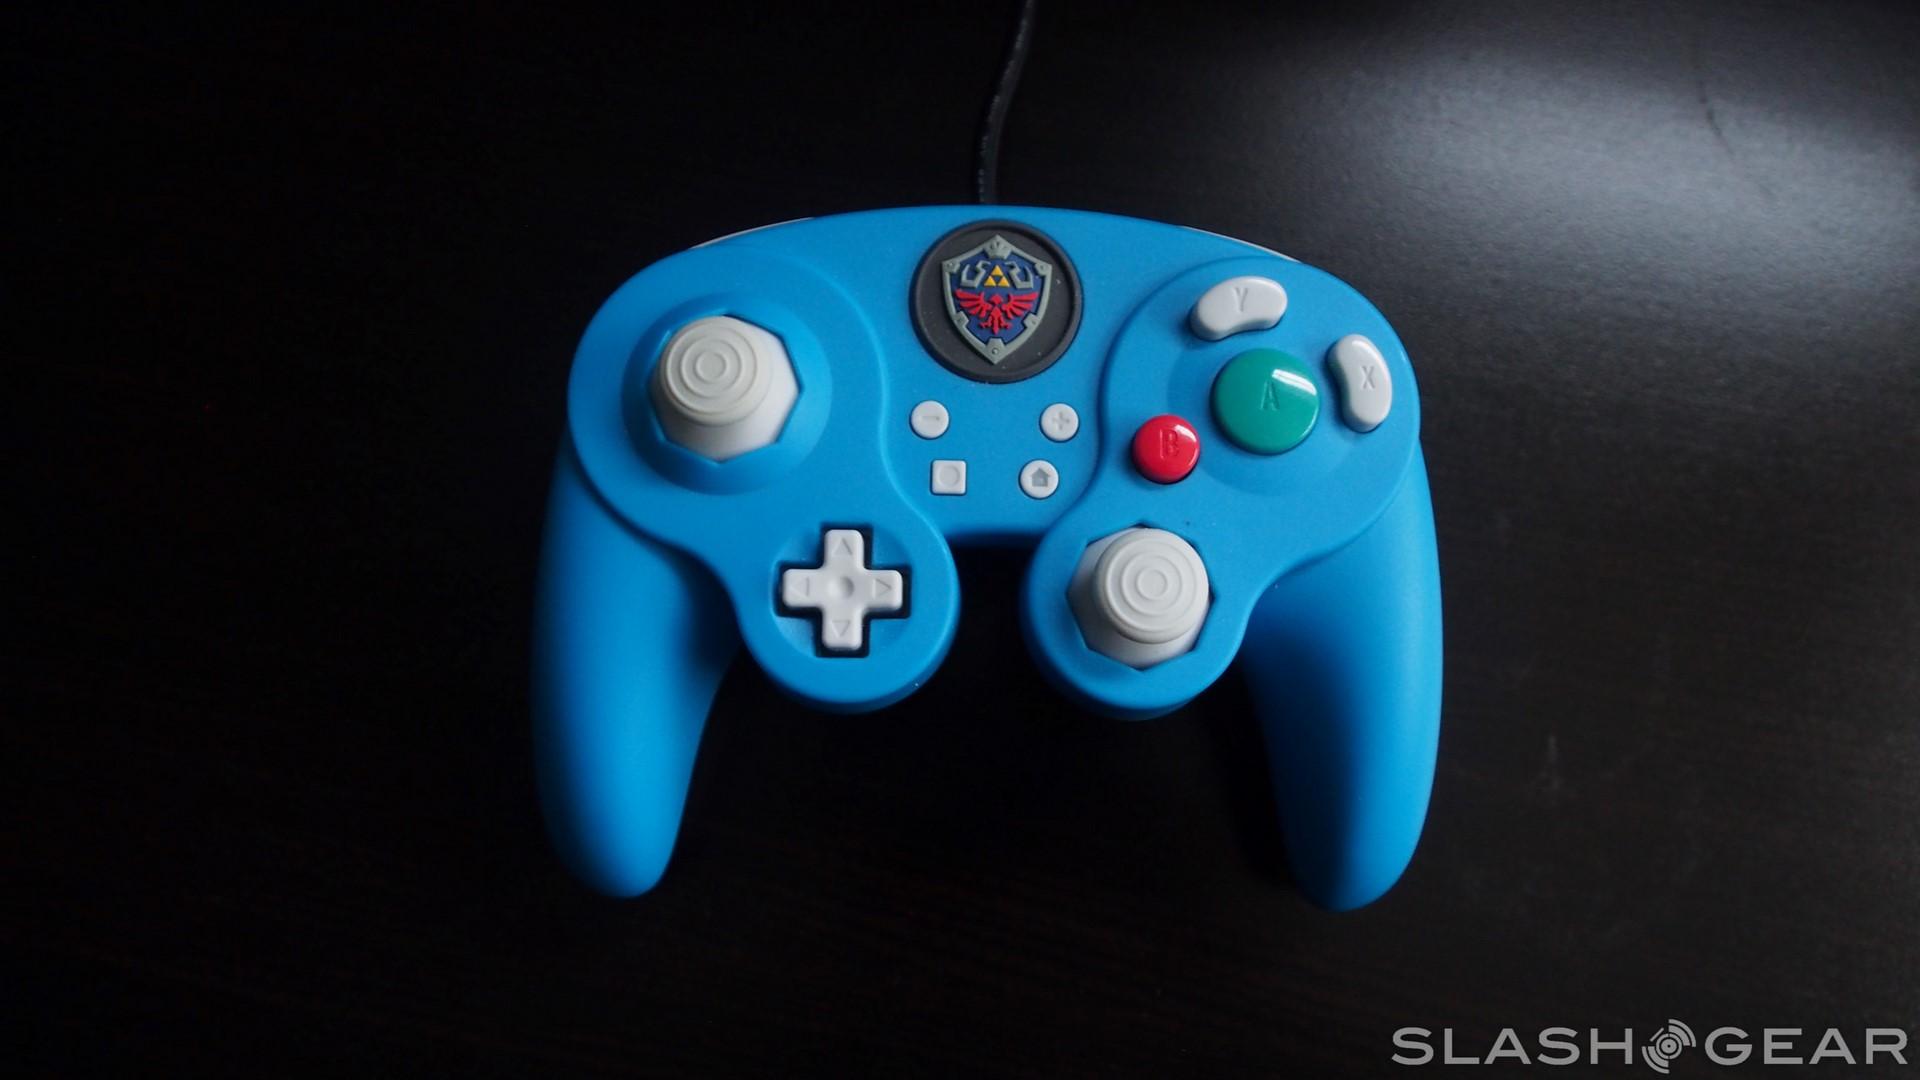 nintendo switch wired gamecube controller